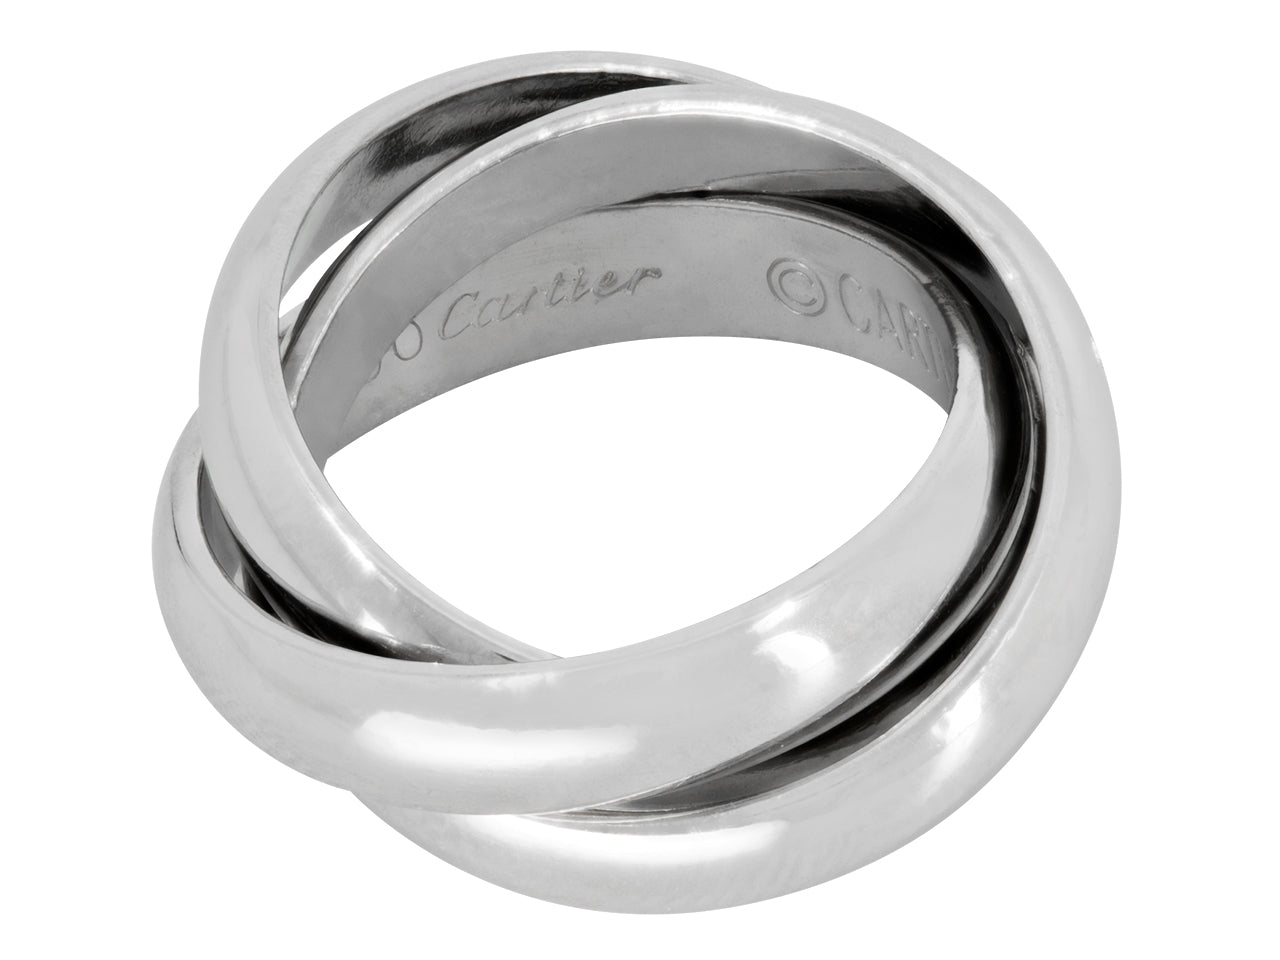 Cartier "Trinity" Ring in Platinum, Large